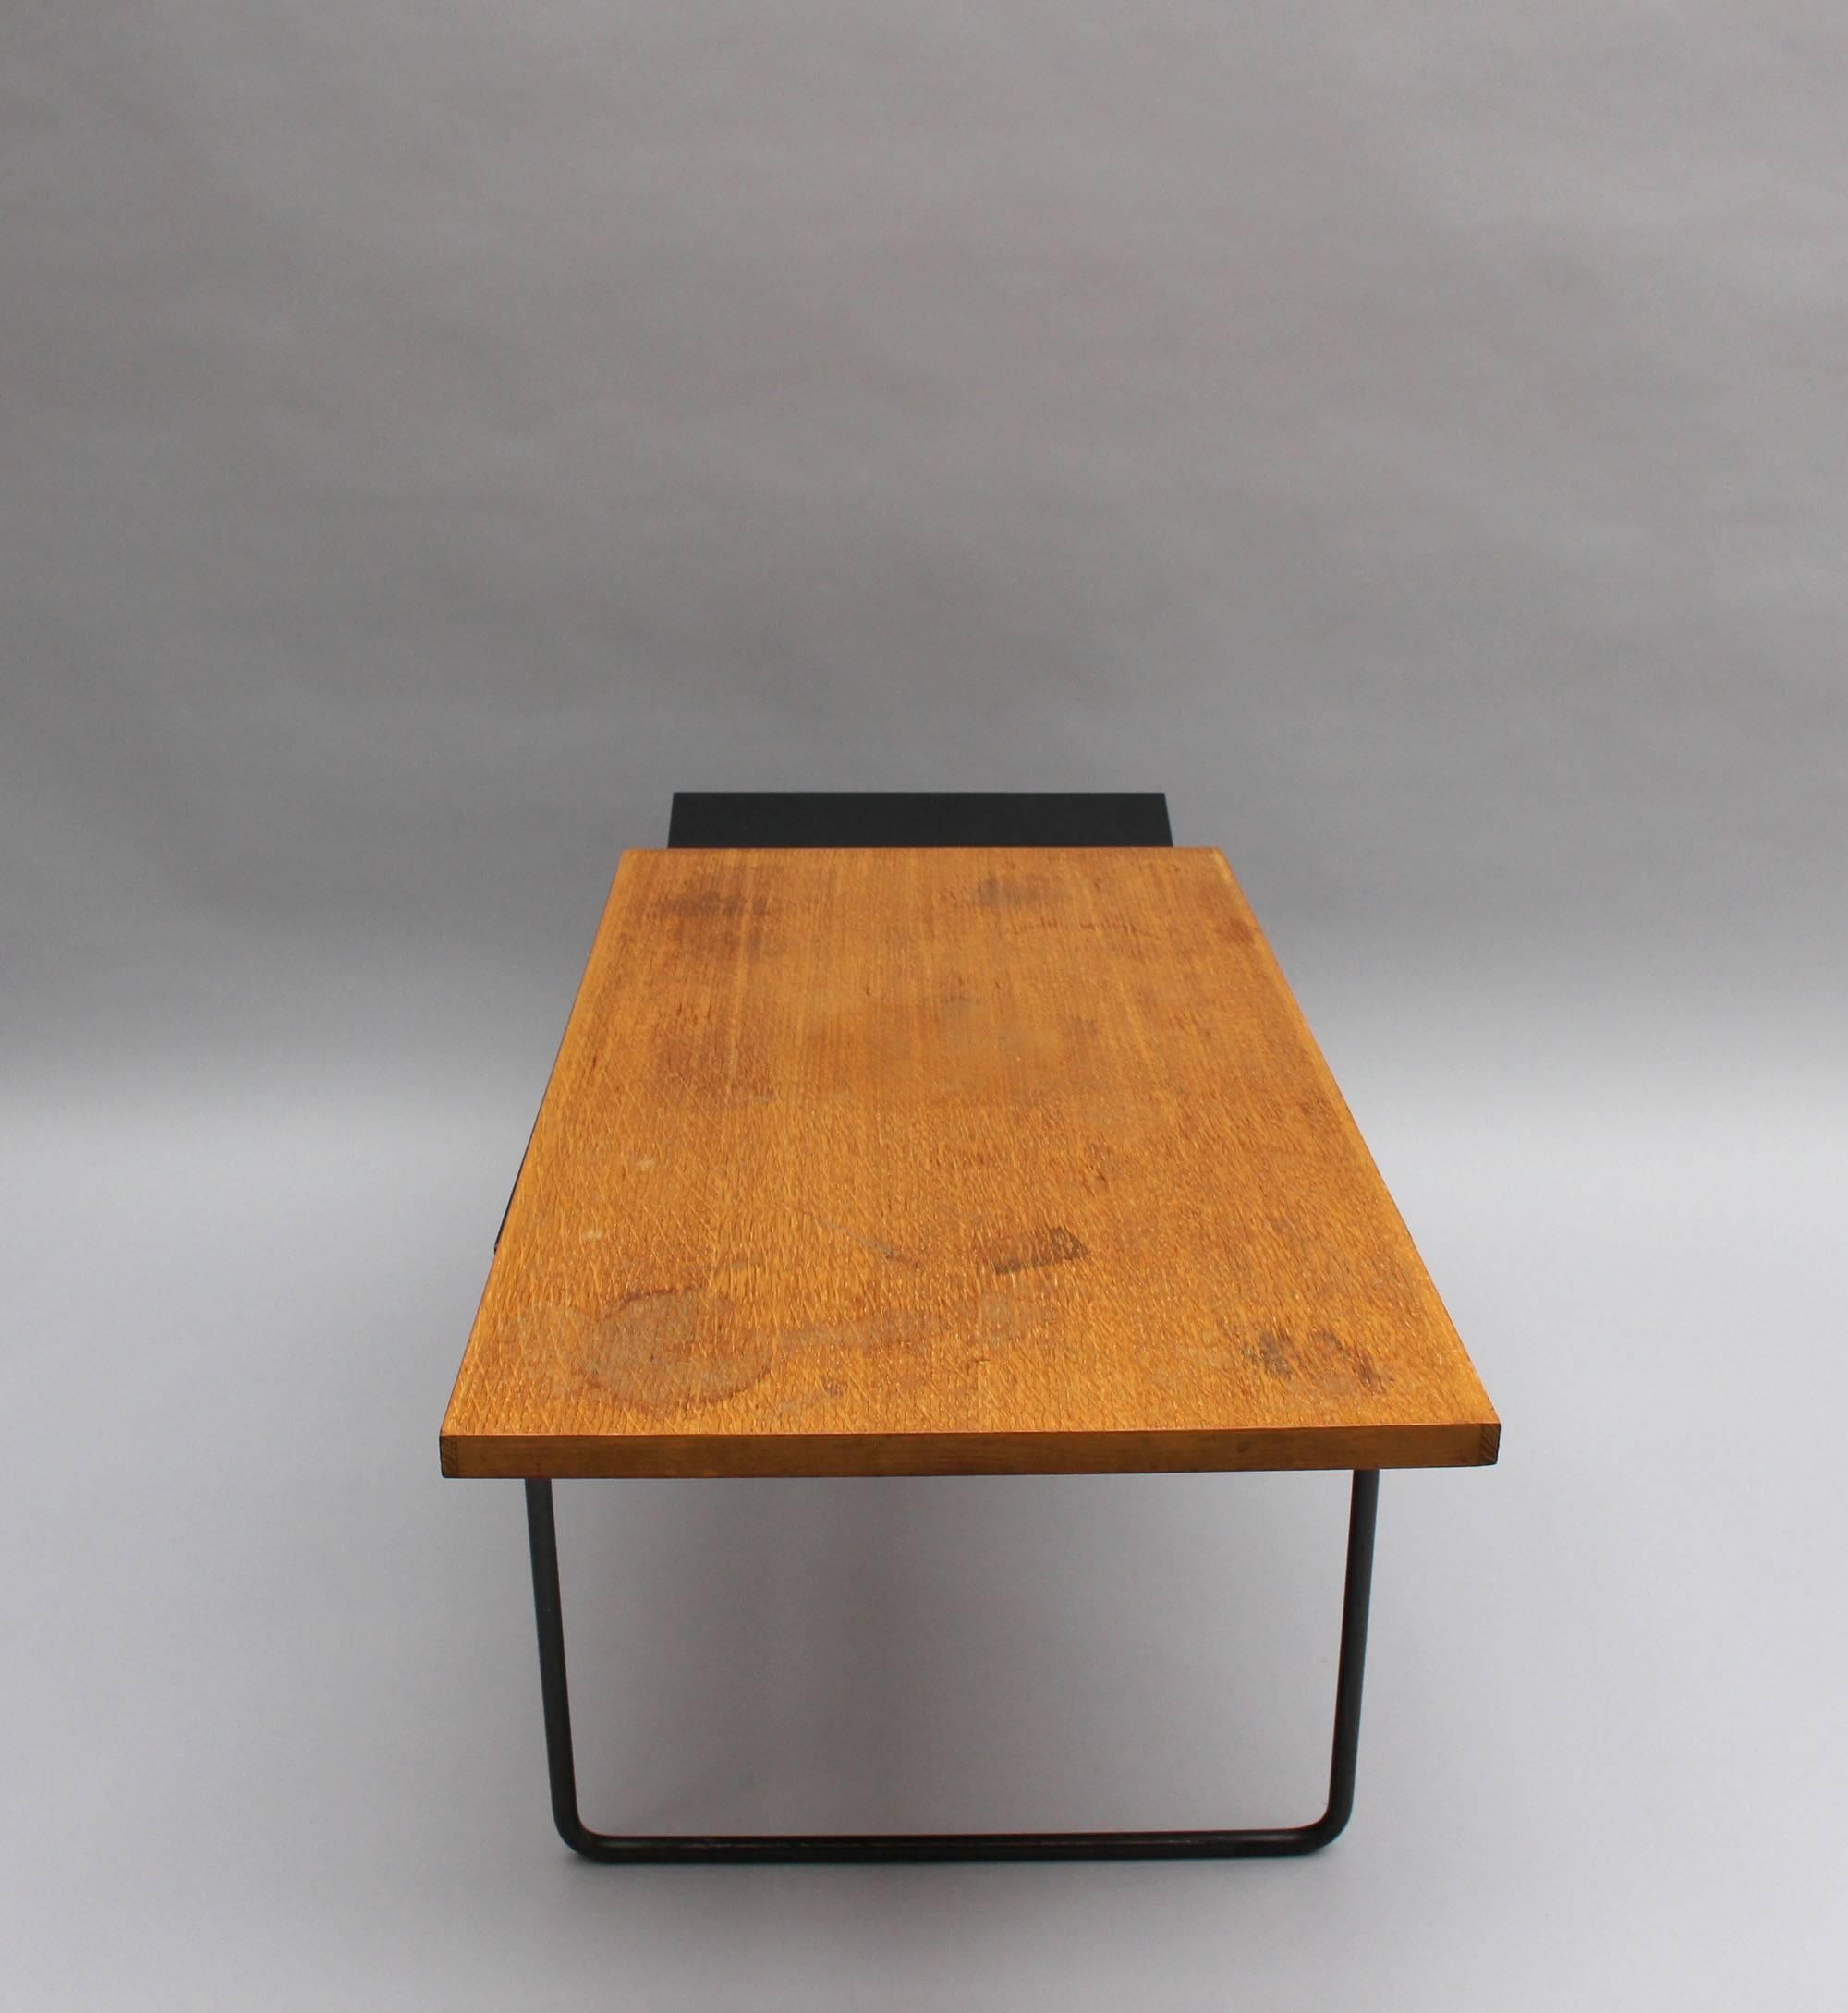 A Fine French Mid-Century Oak and Laminate Coffee Table with a Metal Base 2